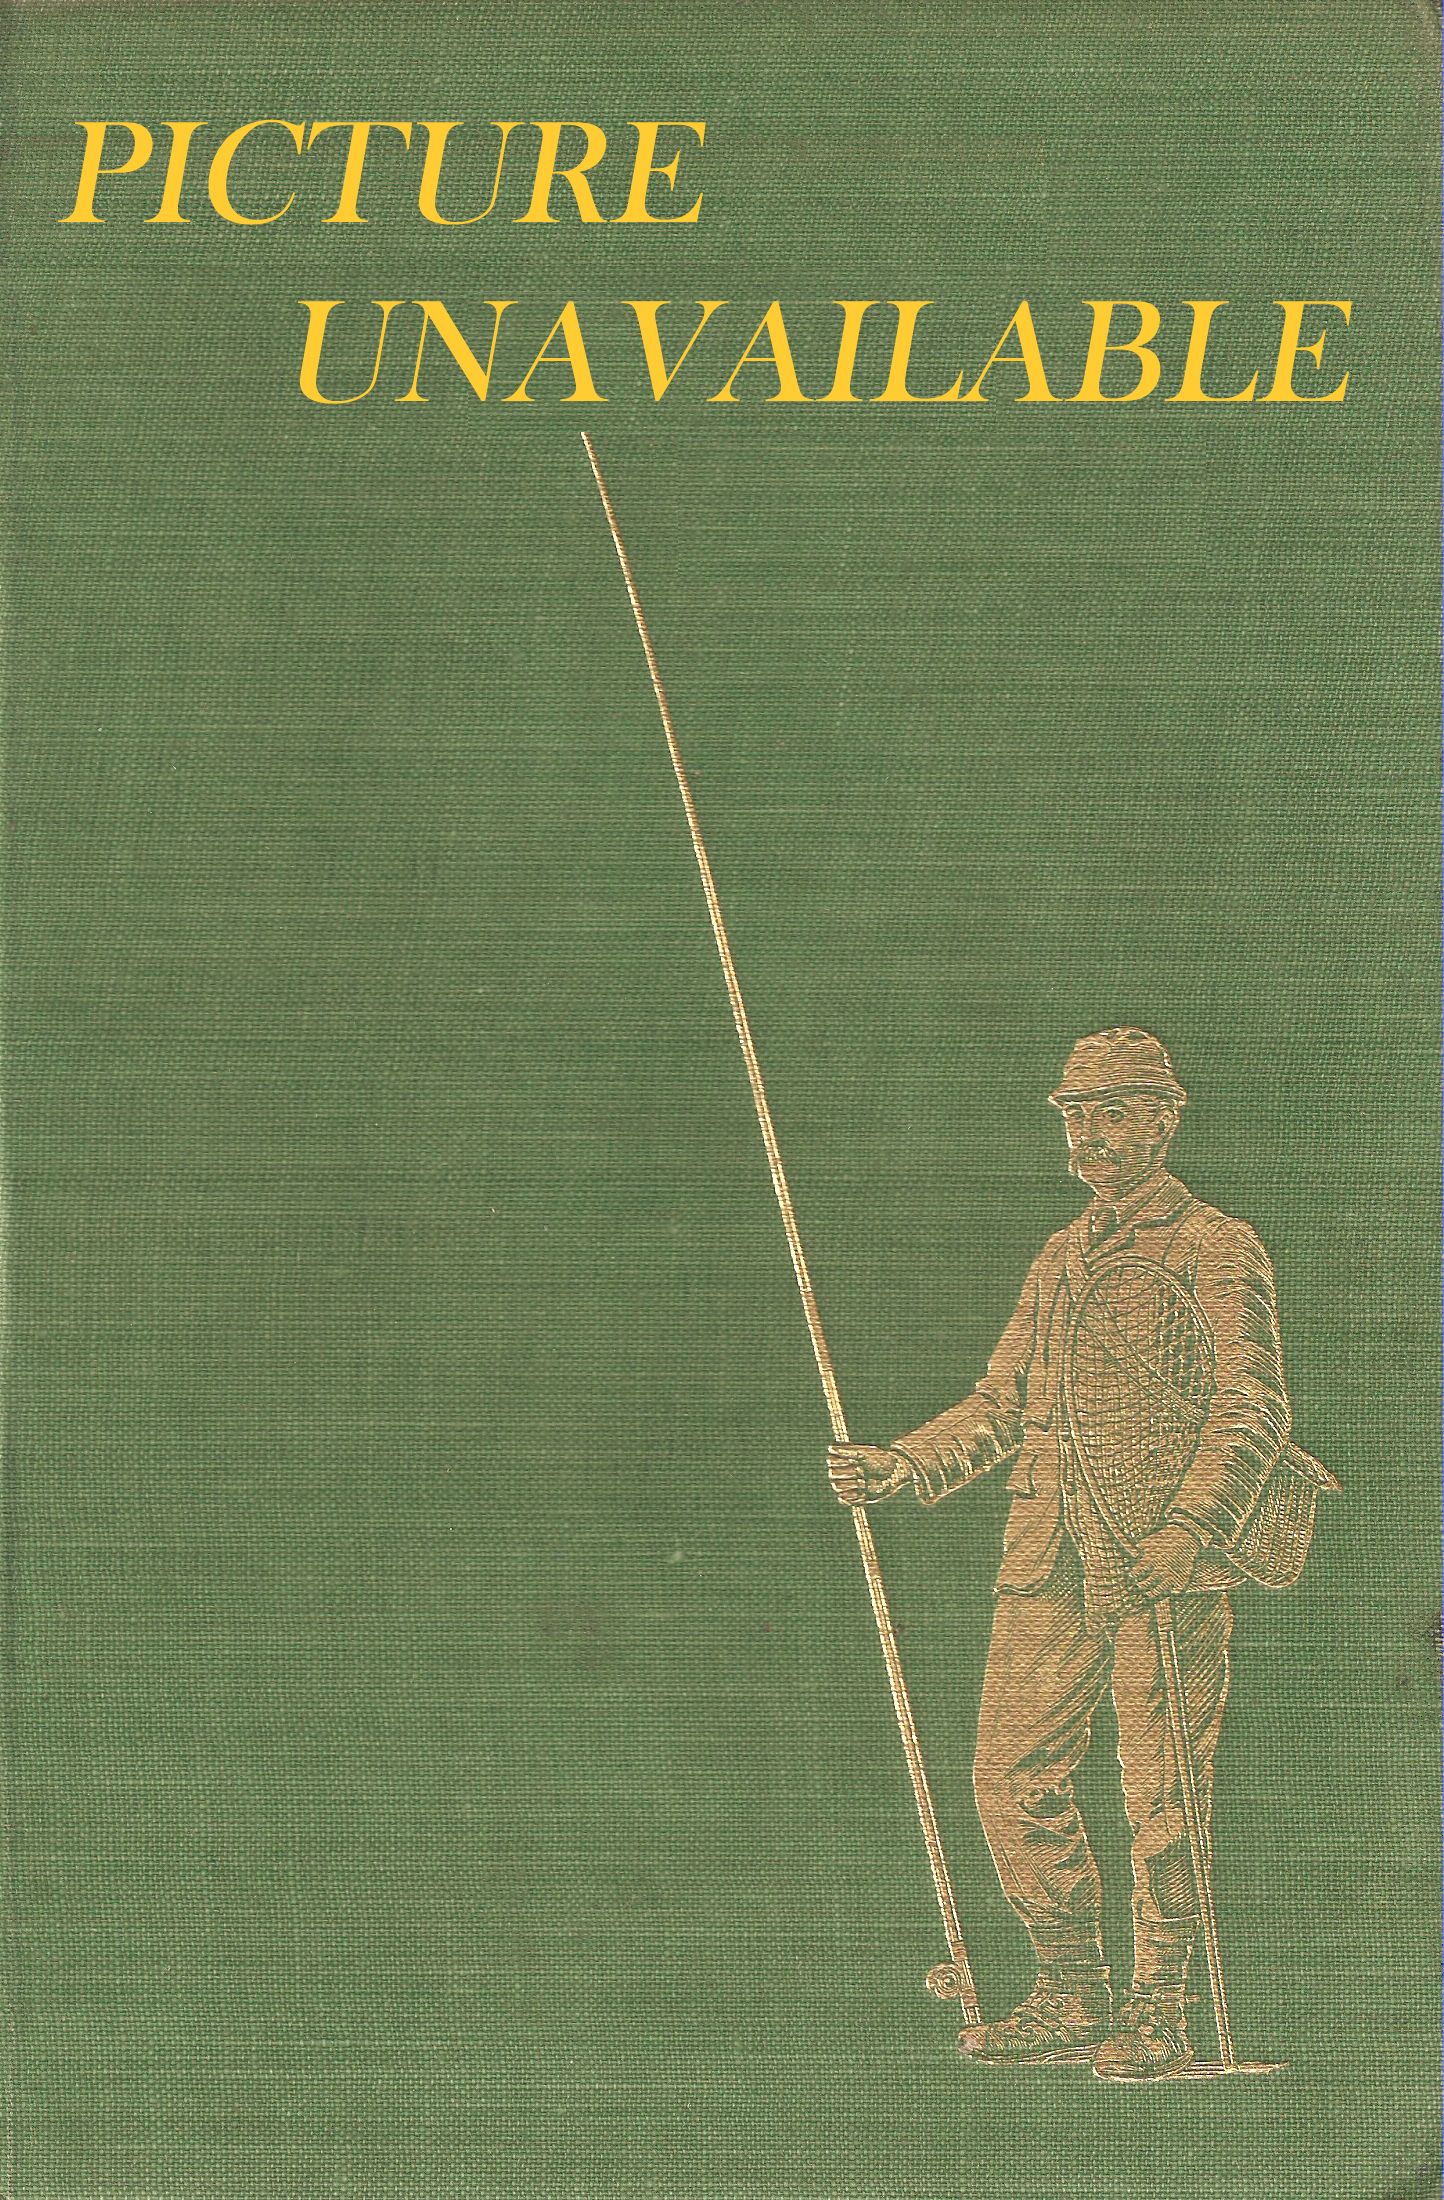 FISHERMAN'S PIE: AN ANGLING SYMPOSIUM. Edited by W.A. Hunter.